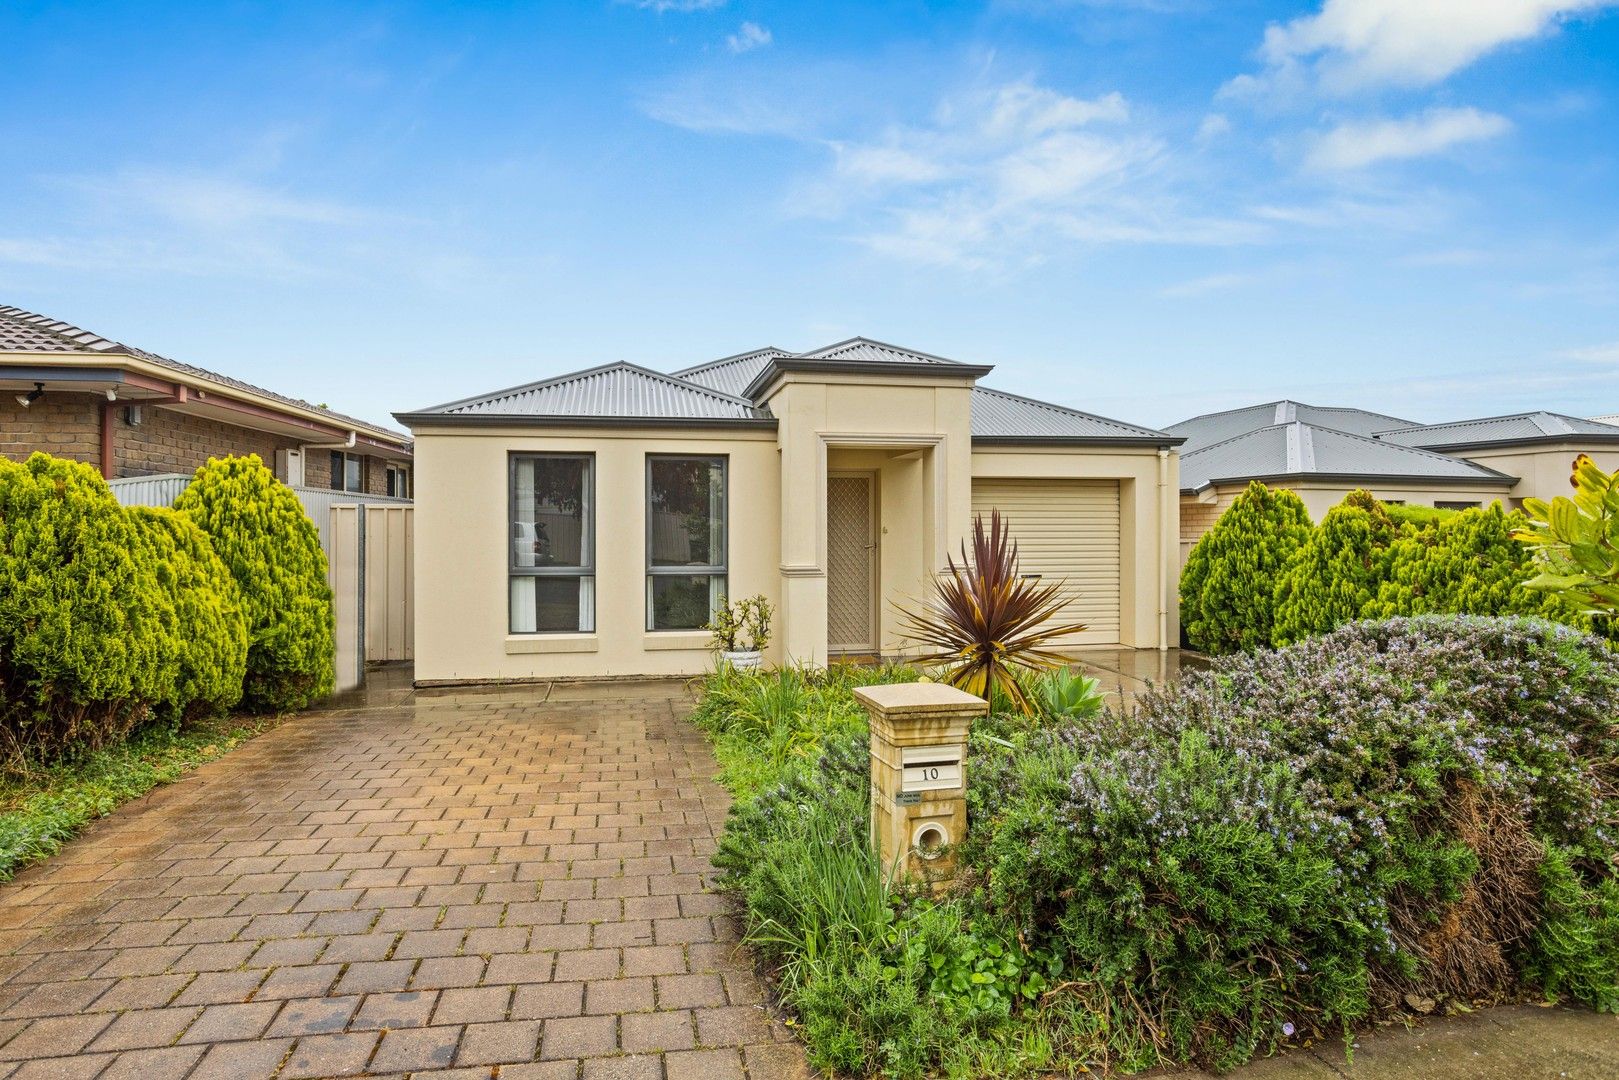 3 bedrooms House in 10 Seaforth Avenue DOVER GARDENS SA, 5048